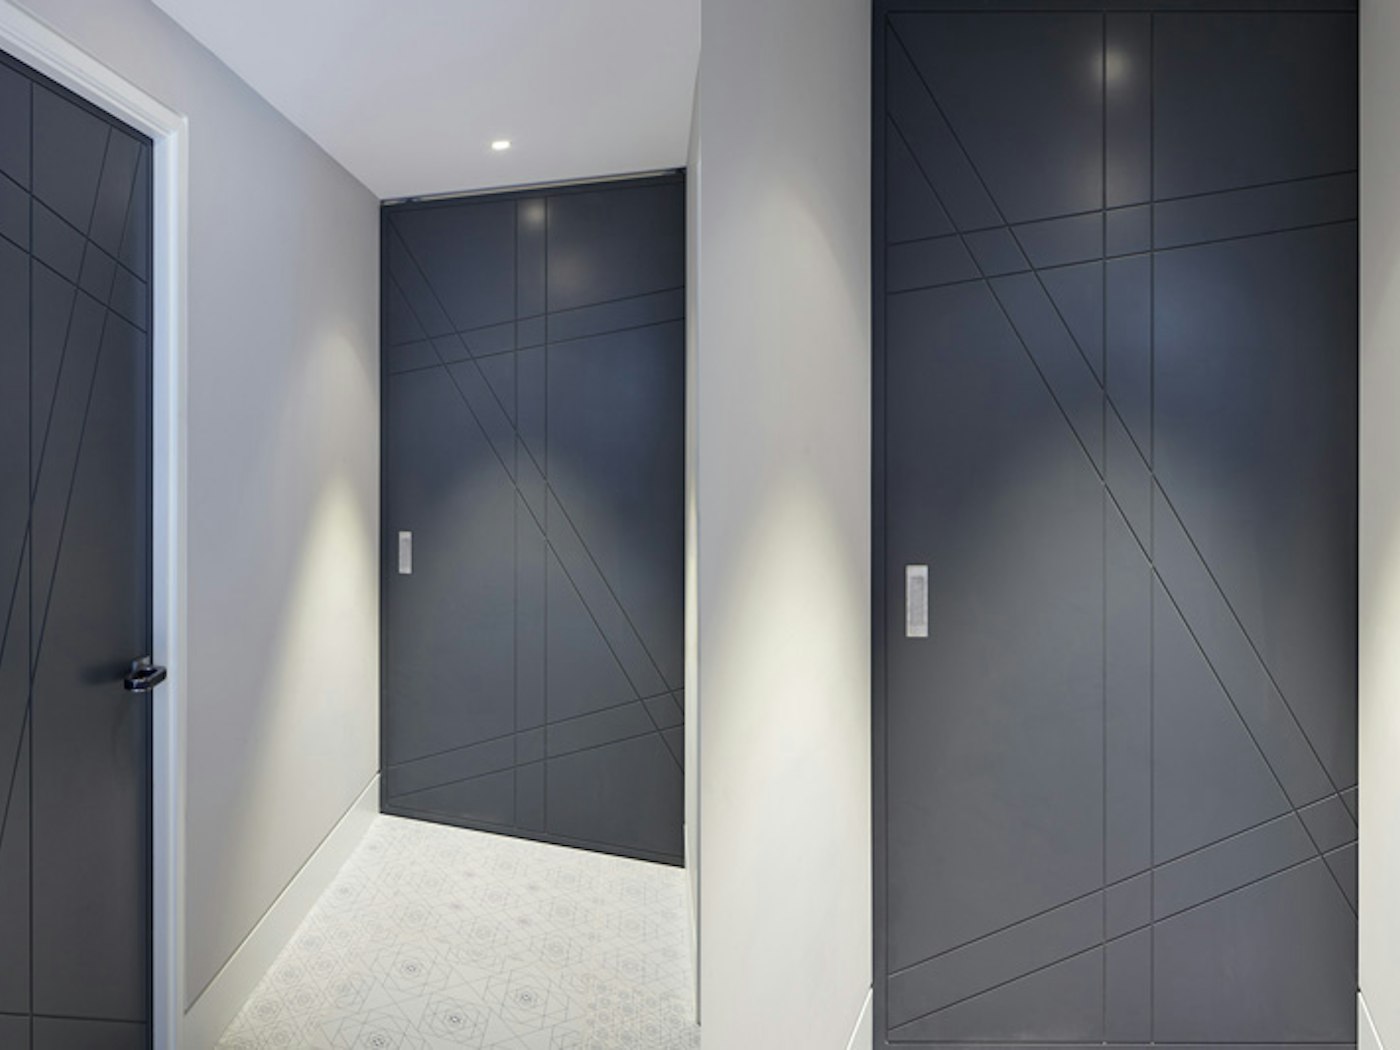 in this hallway the same design and colour have been used as well as a space saving pocket door